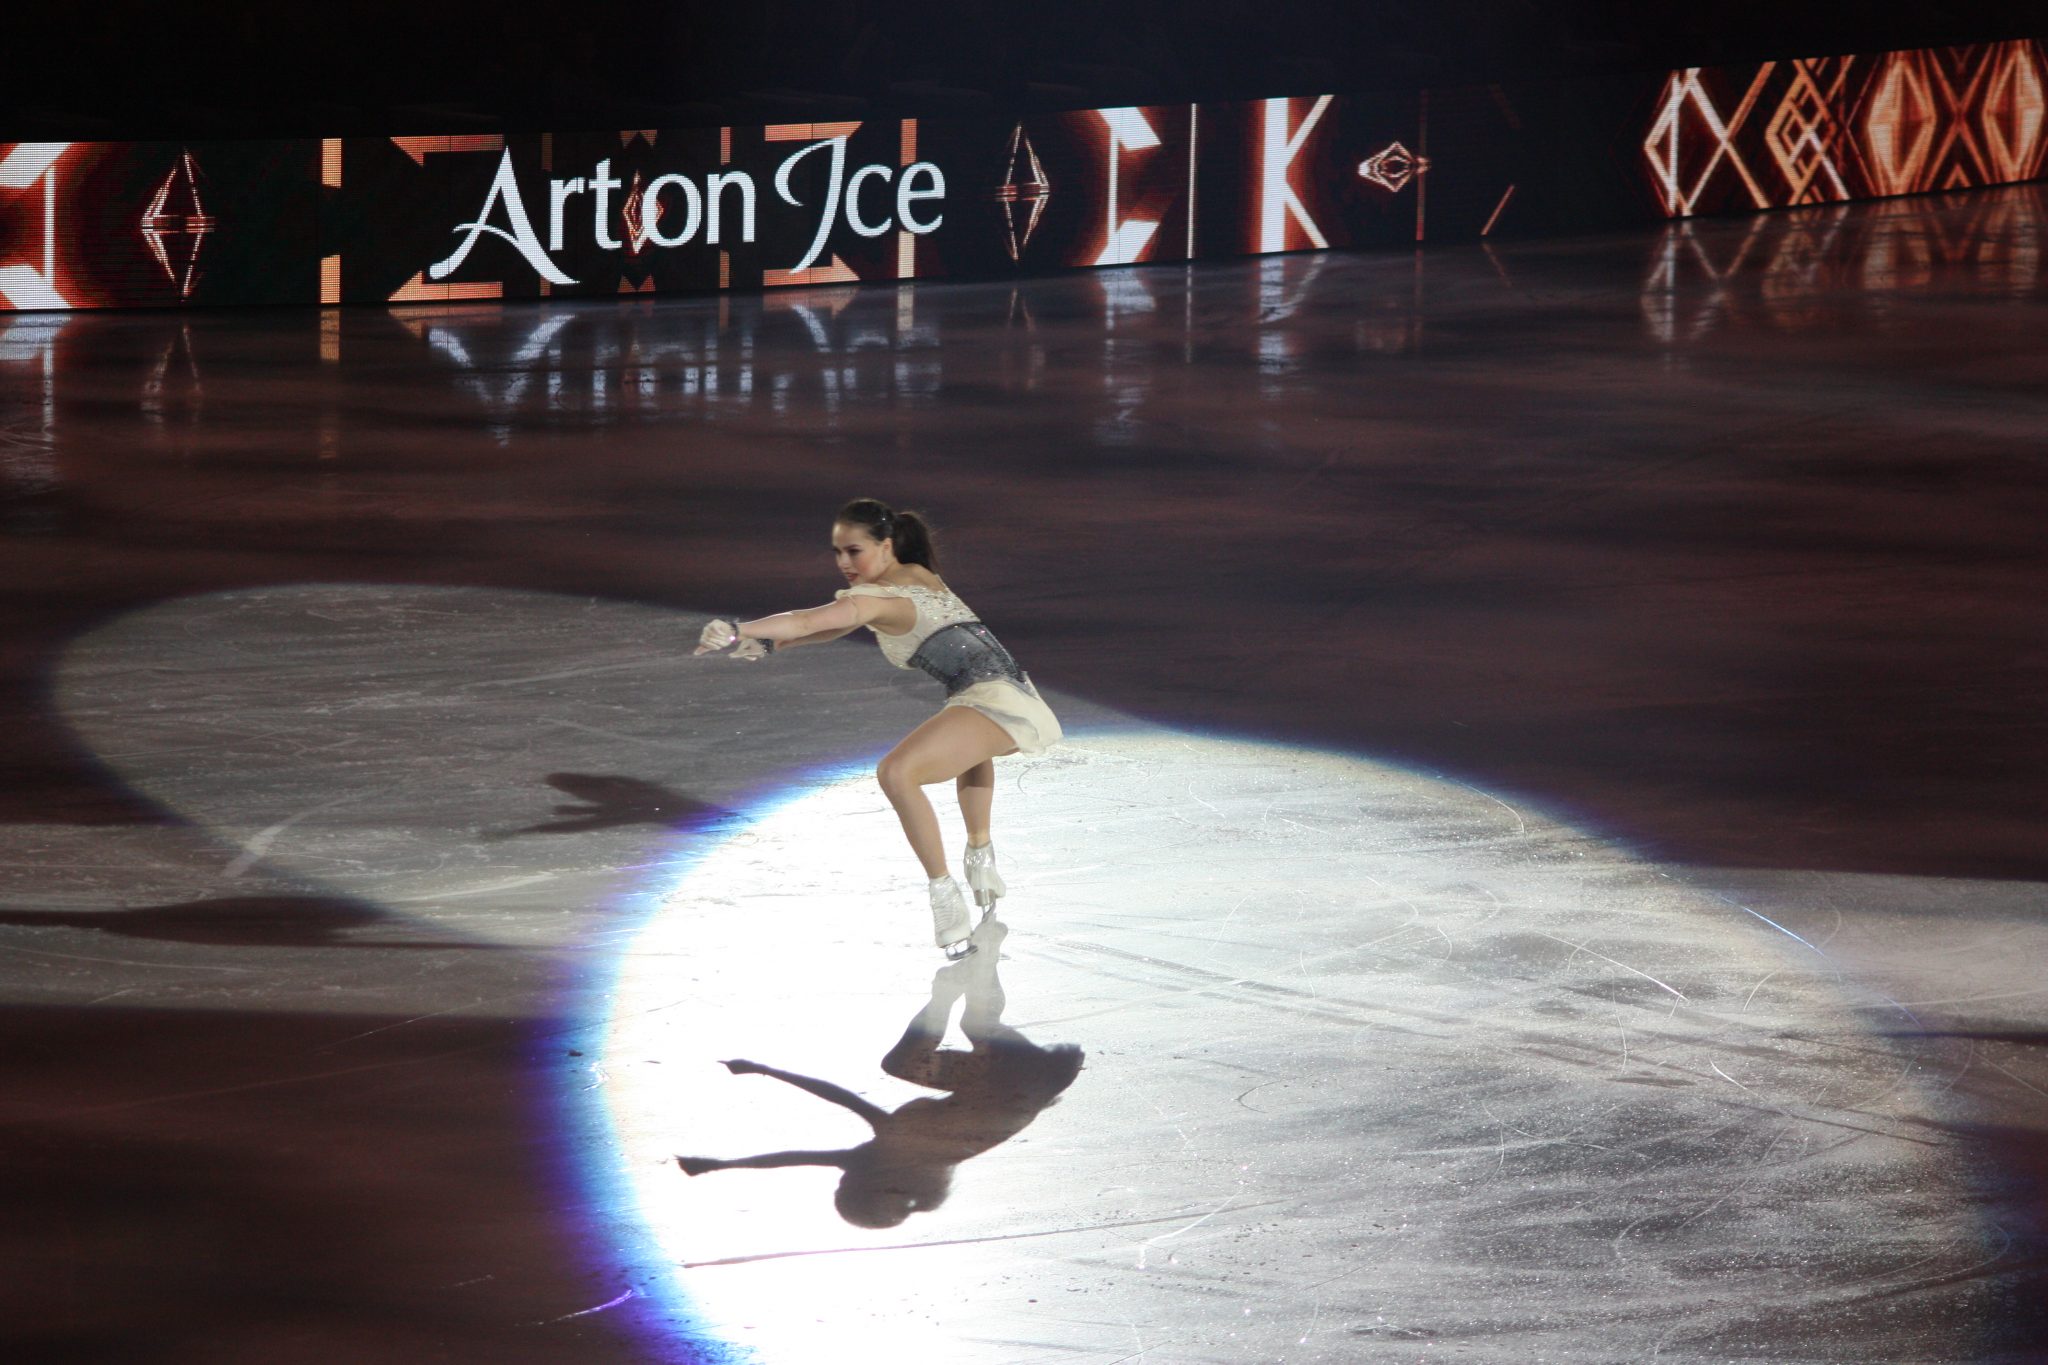 Art on Ice celebrates its 25th anniversary with passion and class